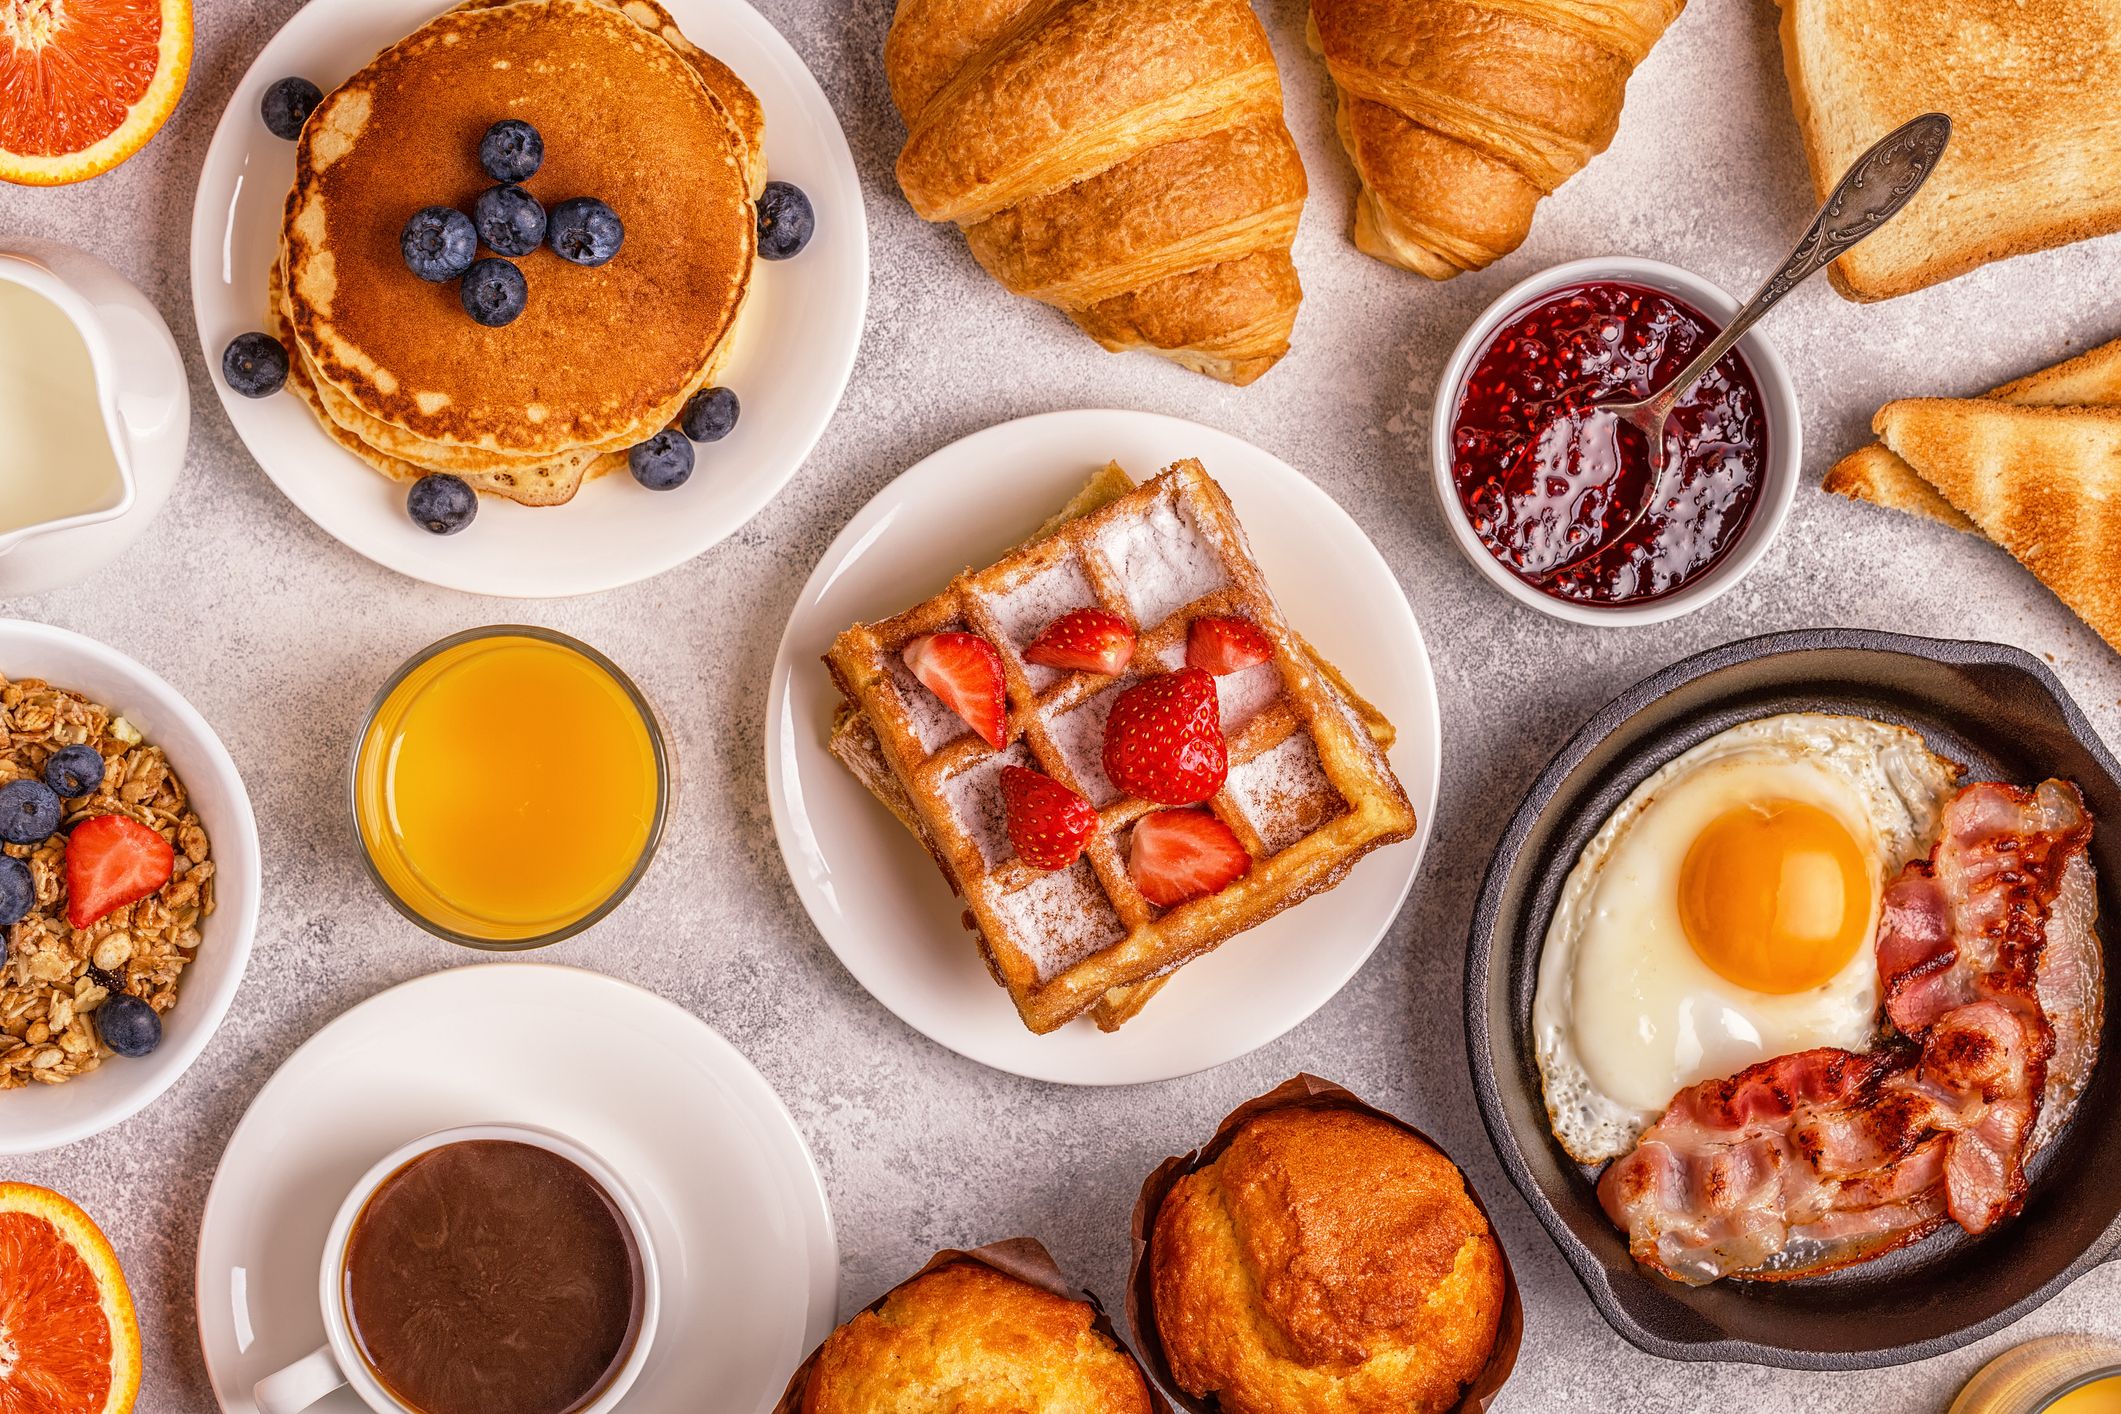 An arrangement of waffles, fruit, croissants, eggs, bacon, pancakes, and other breakfast foods spread on a table.